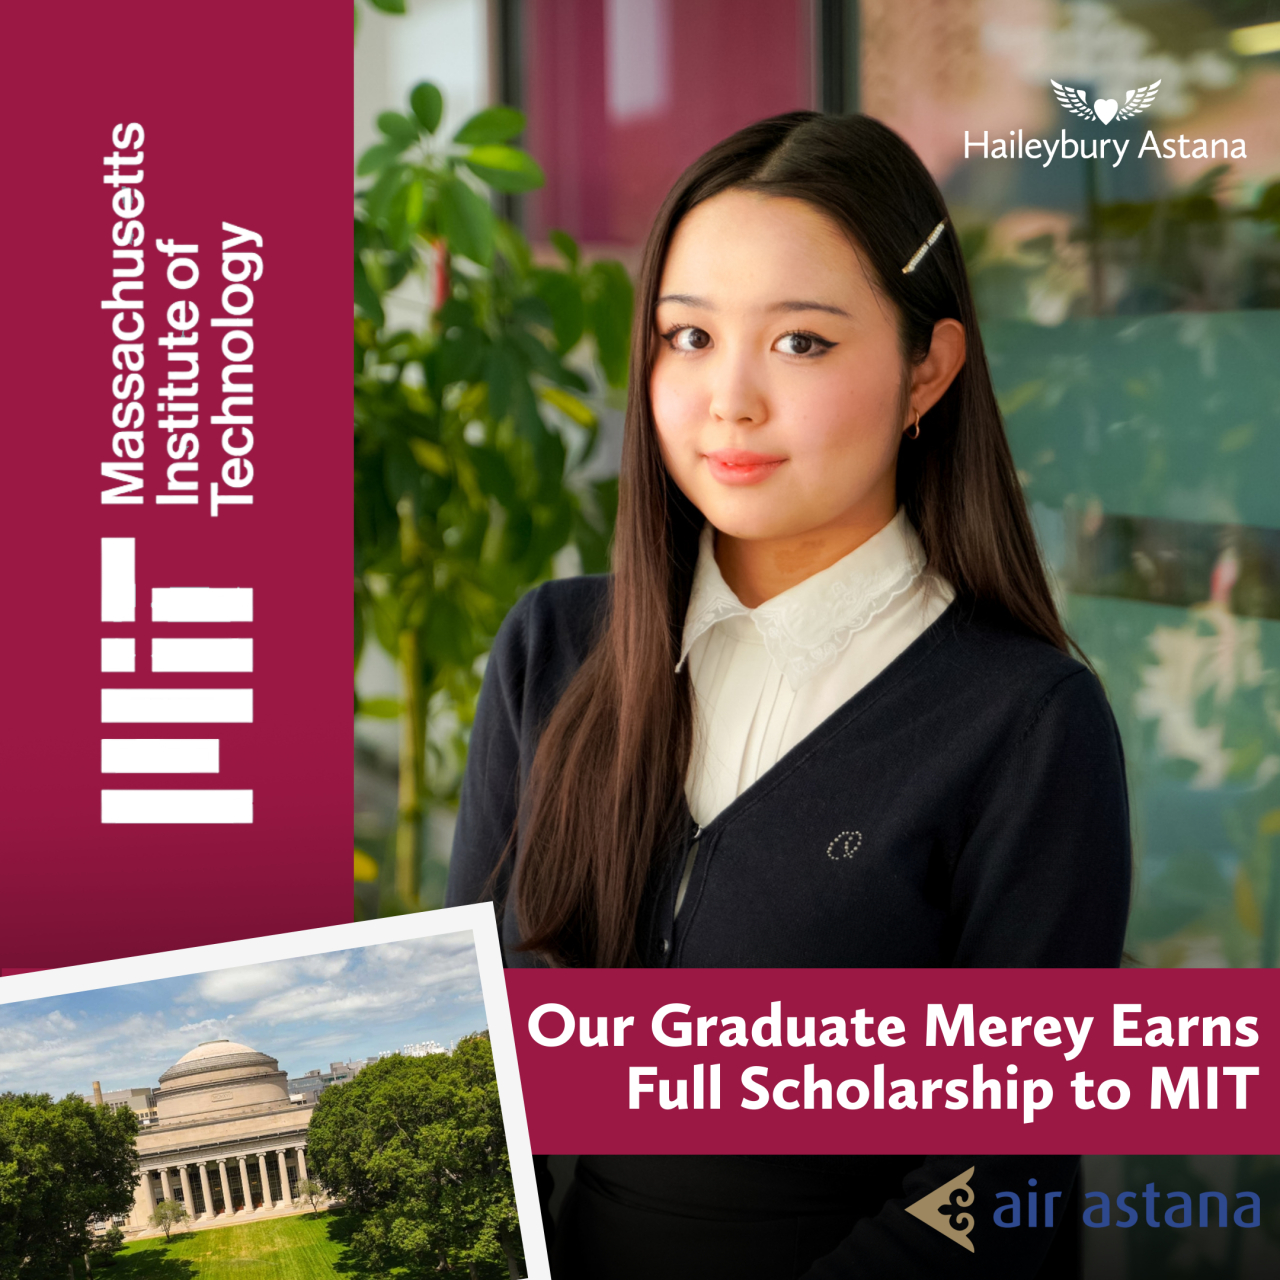 Our Graduate Merey Got Accepted to MIT with a Full Scholarship!